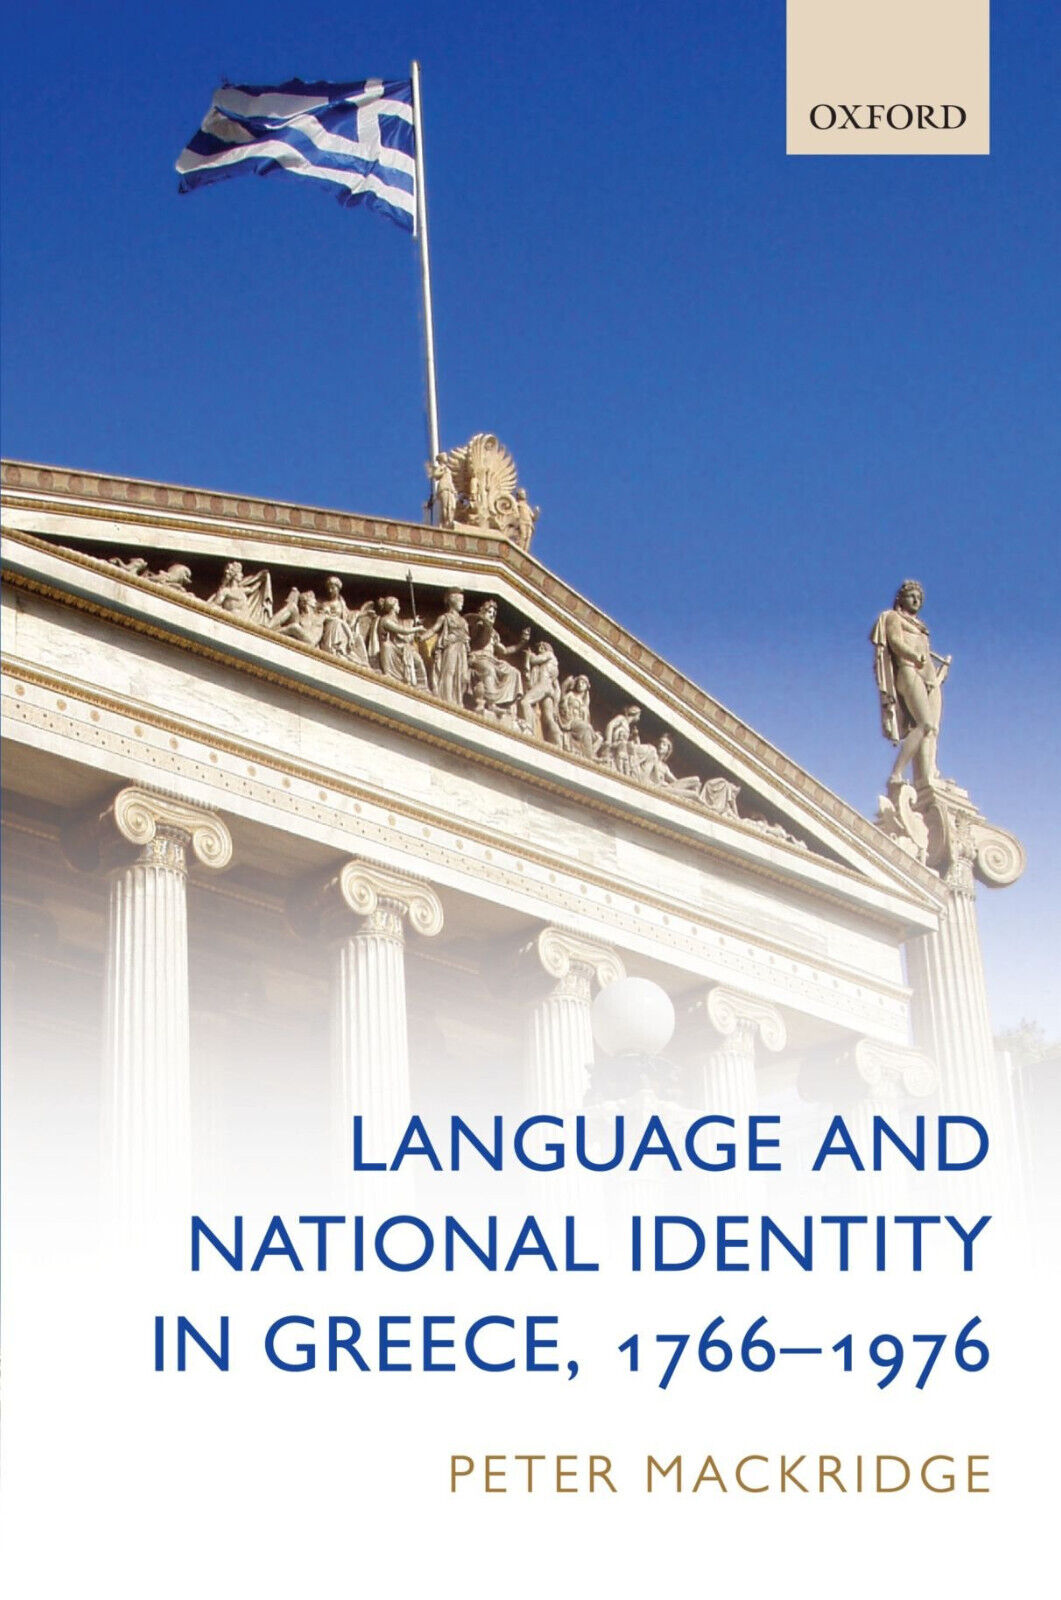 Language and National Identity in Greece, 1766-1976 - Peter - Oxford, 2010 libro usato